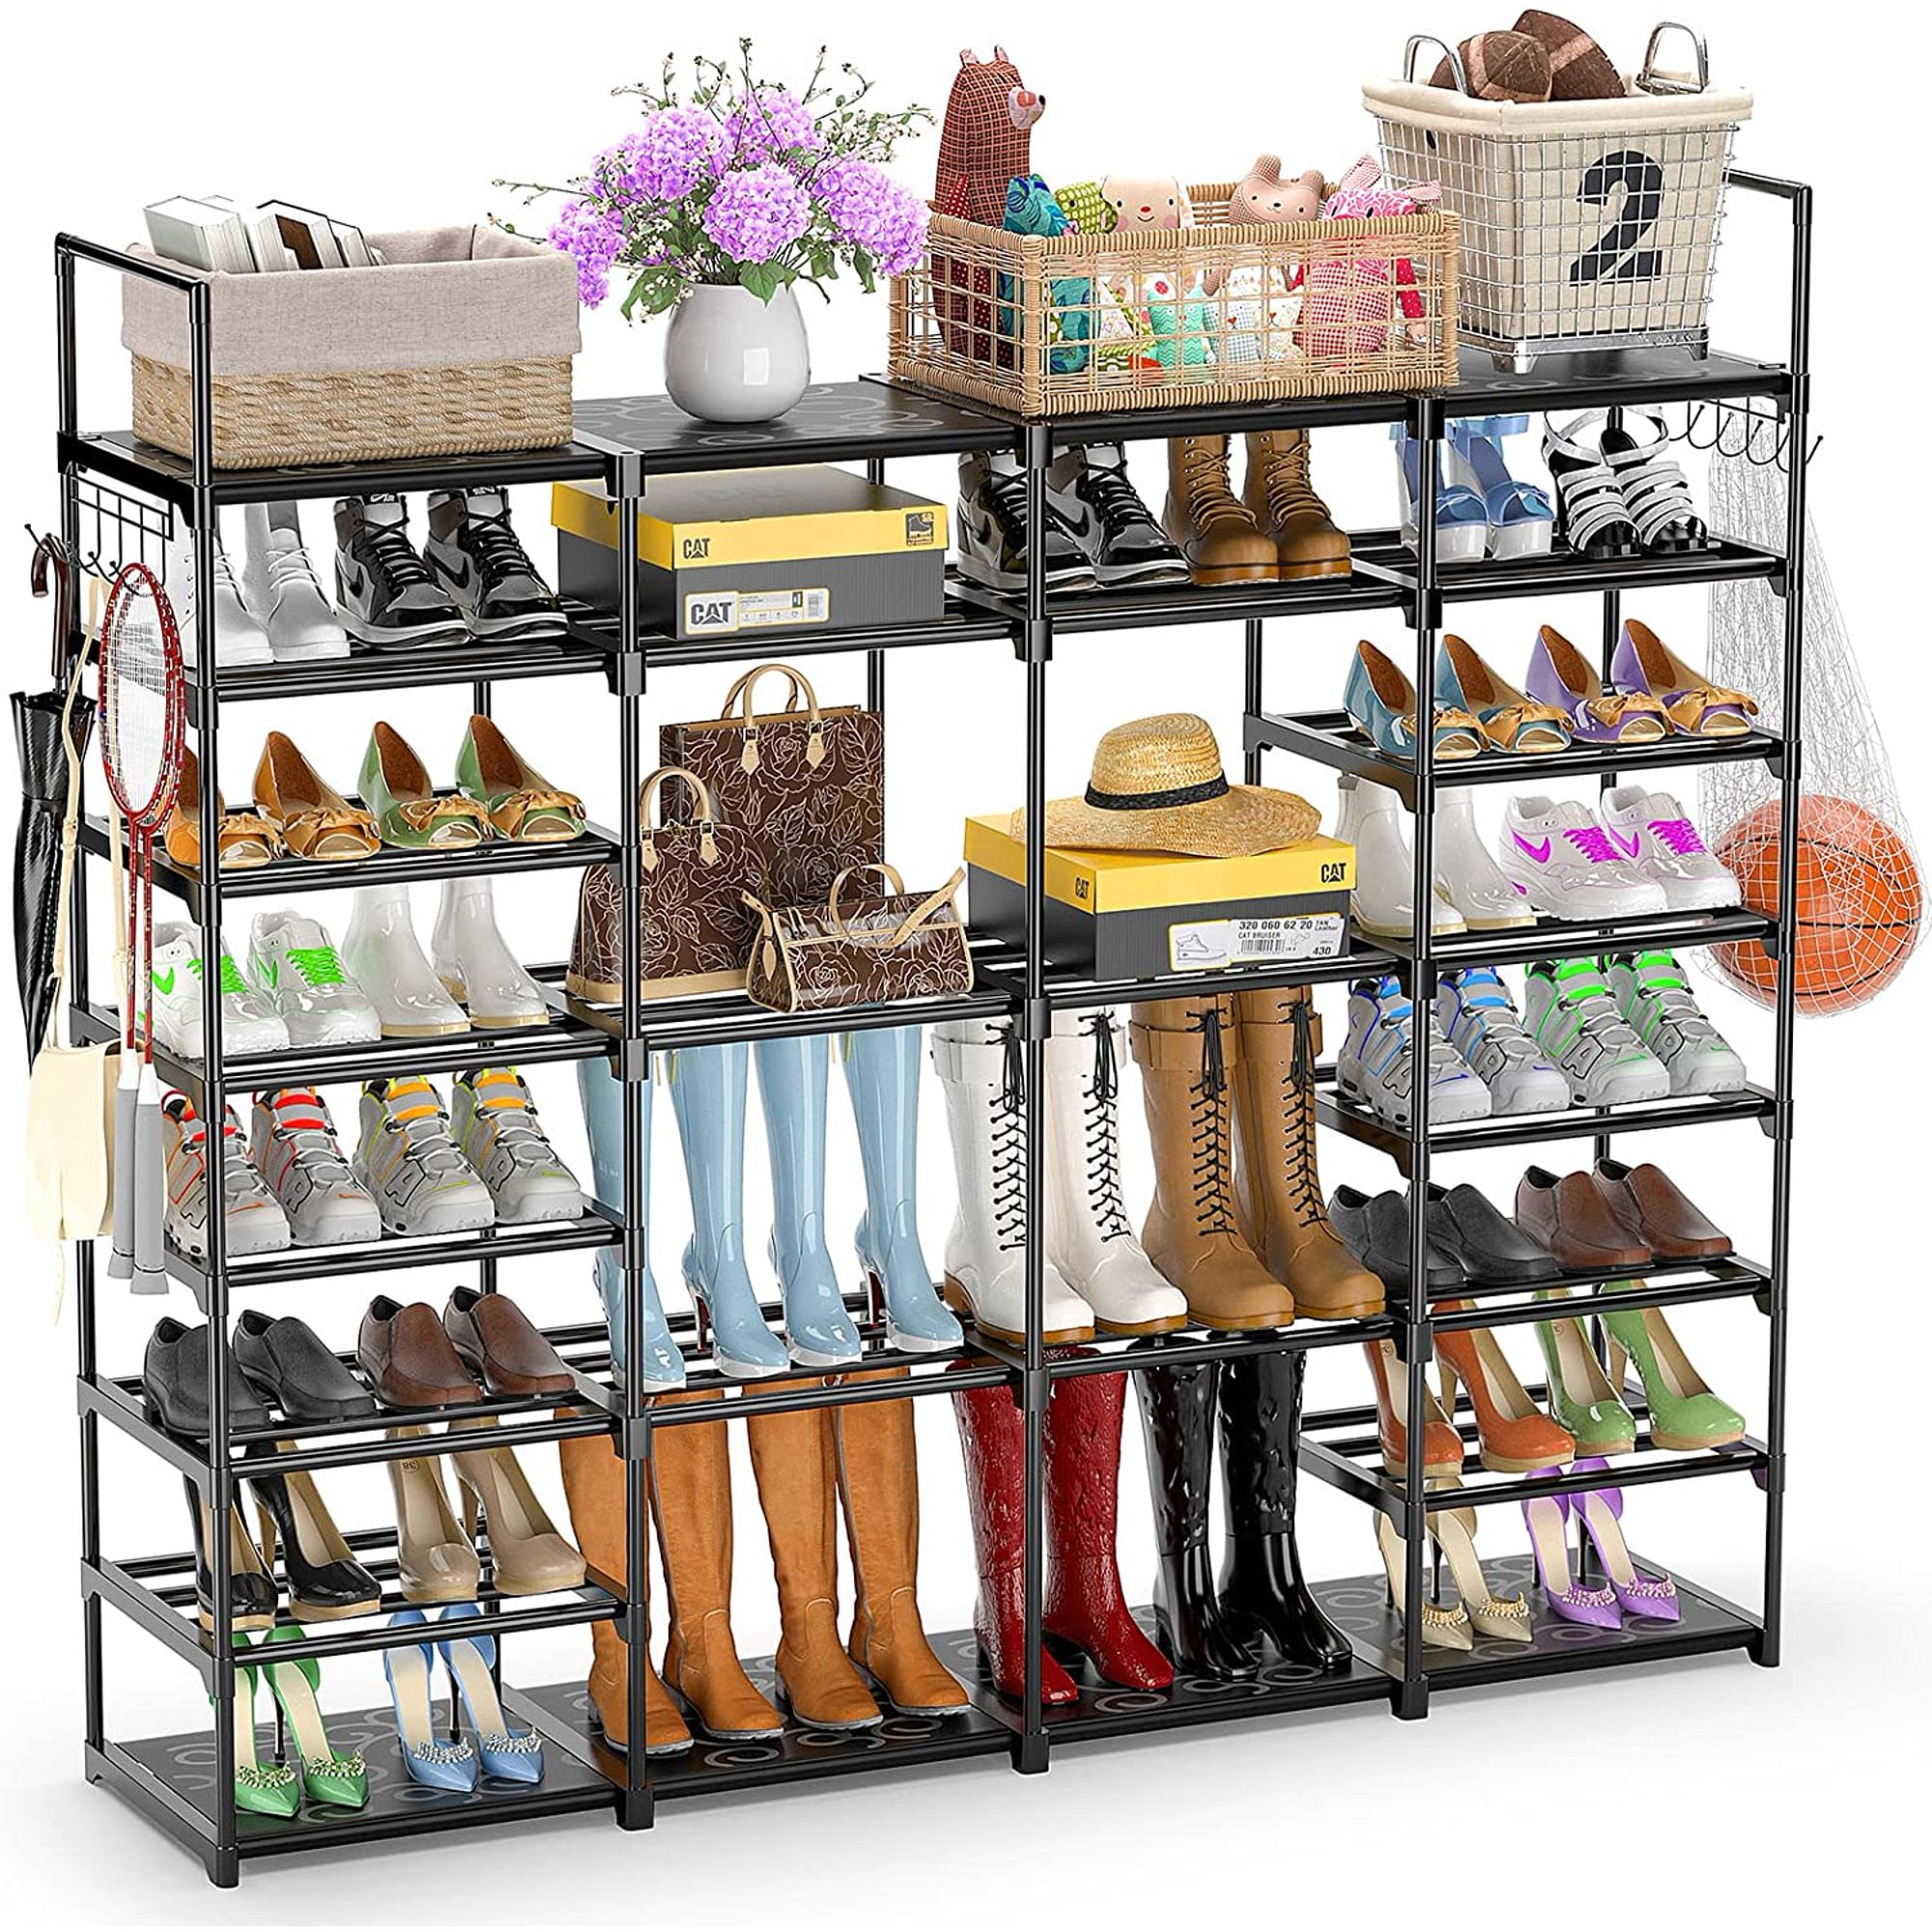 HONEIER 9 Tier Shoe Rack, Shoe Organizer with Nonwoven Fabric Cover, Shoe  Storage Shelf for 27 Pairs of Shoes, Free Standing Shoe Shelf Cabinet for  Entryway, Closet, Garage, Bedroom, Cloakroom 